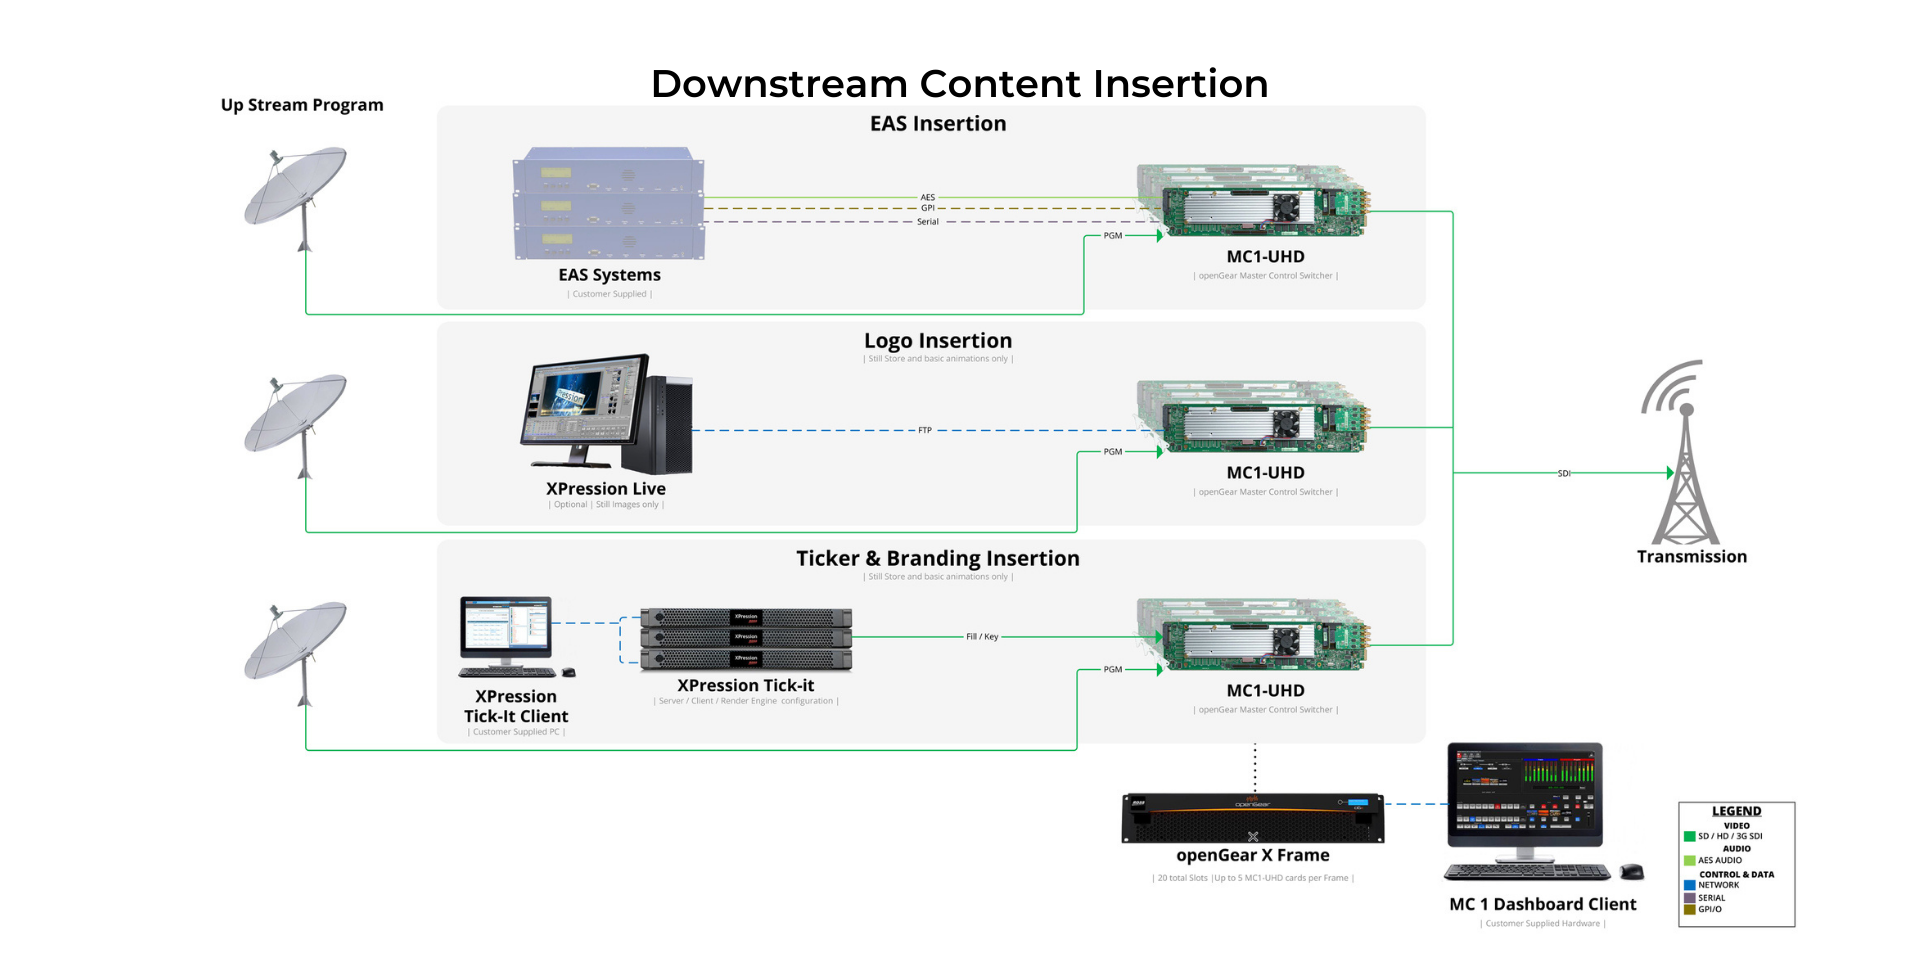 ROSS MASTER CONTROL SOLUTION - Downstream Content Insertion